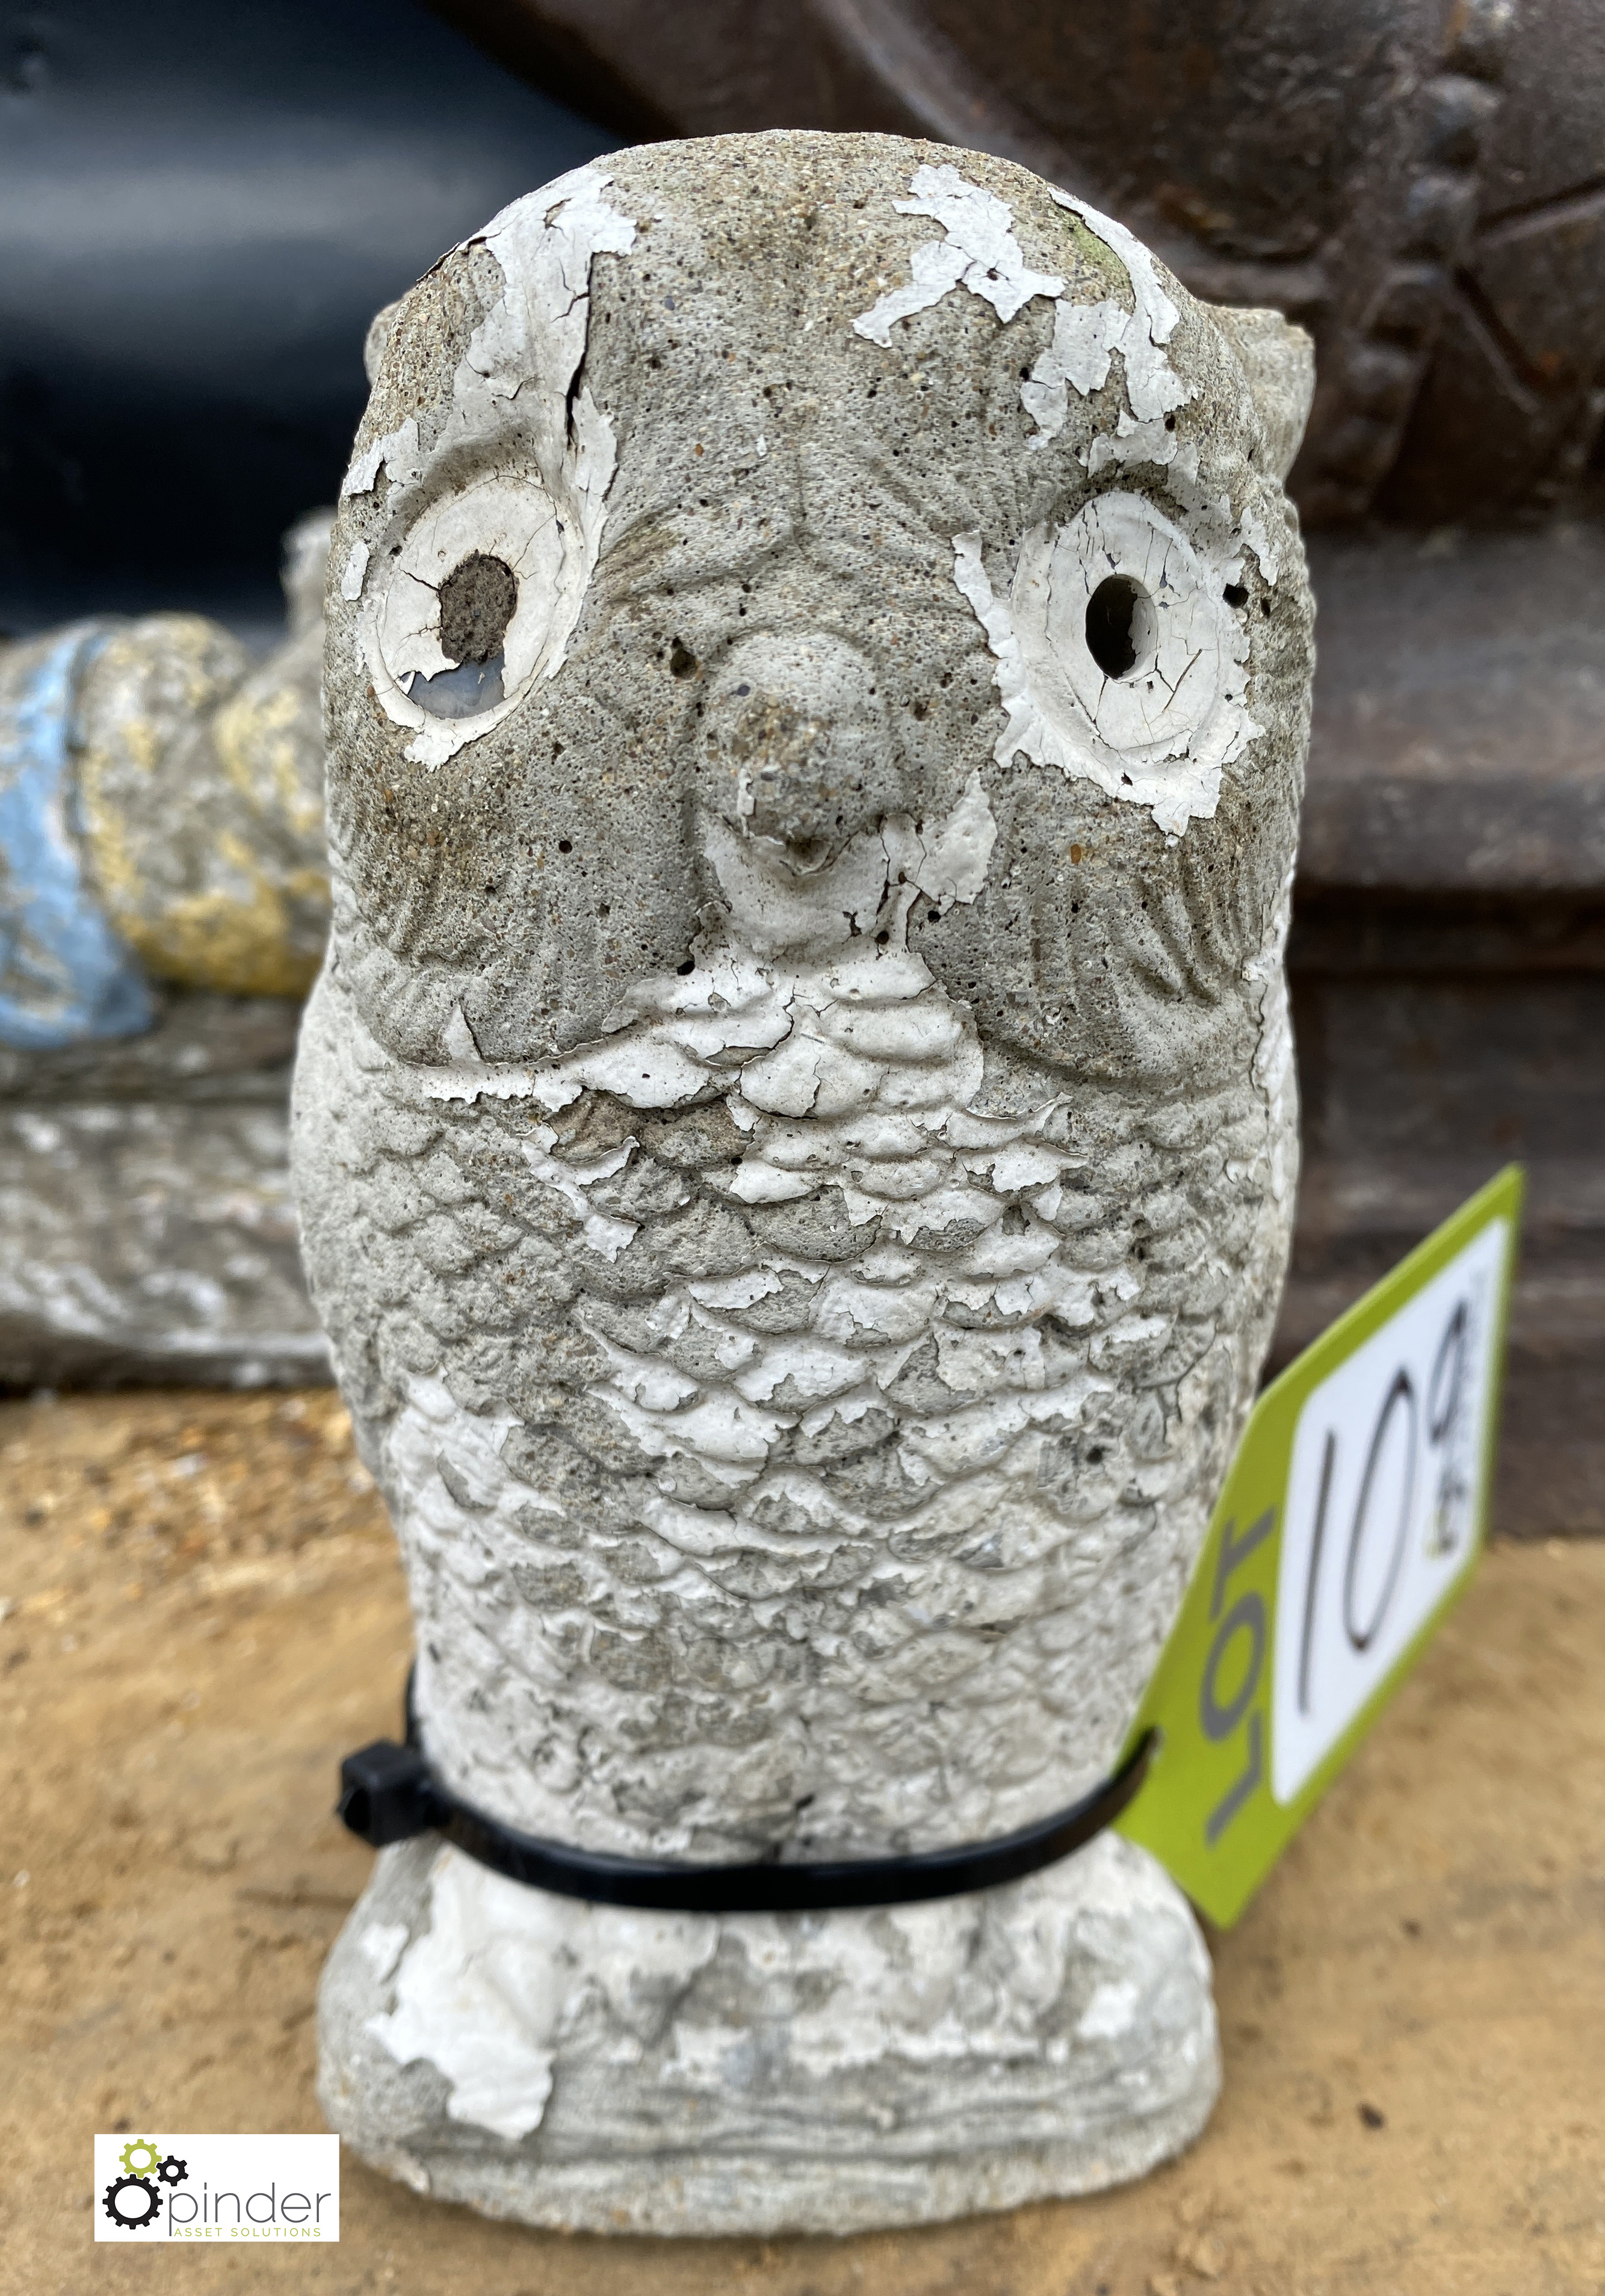 A reconstituted stone Statue of an owl, 7in high